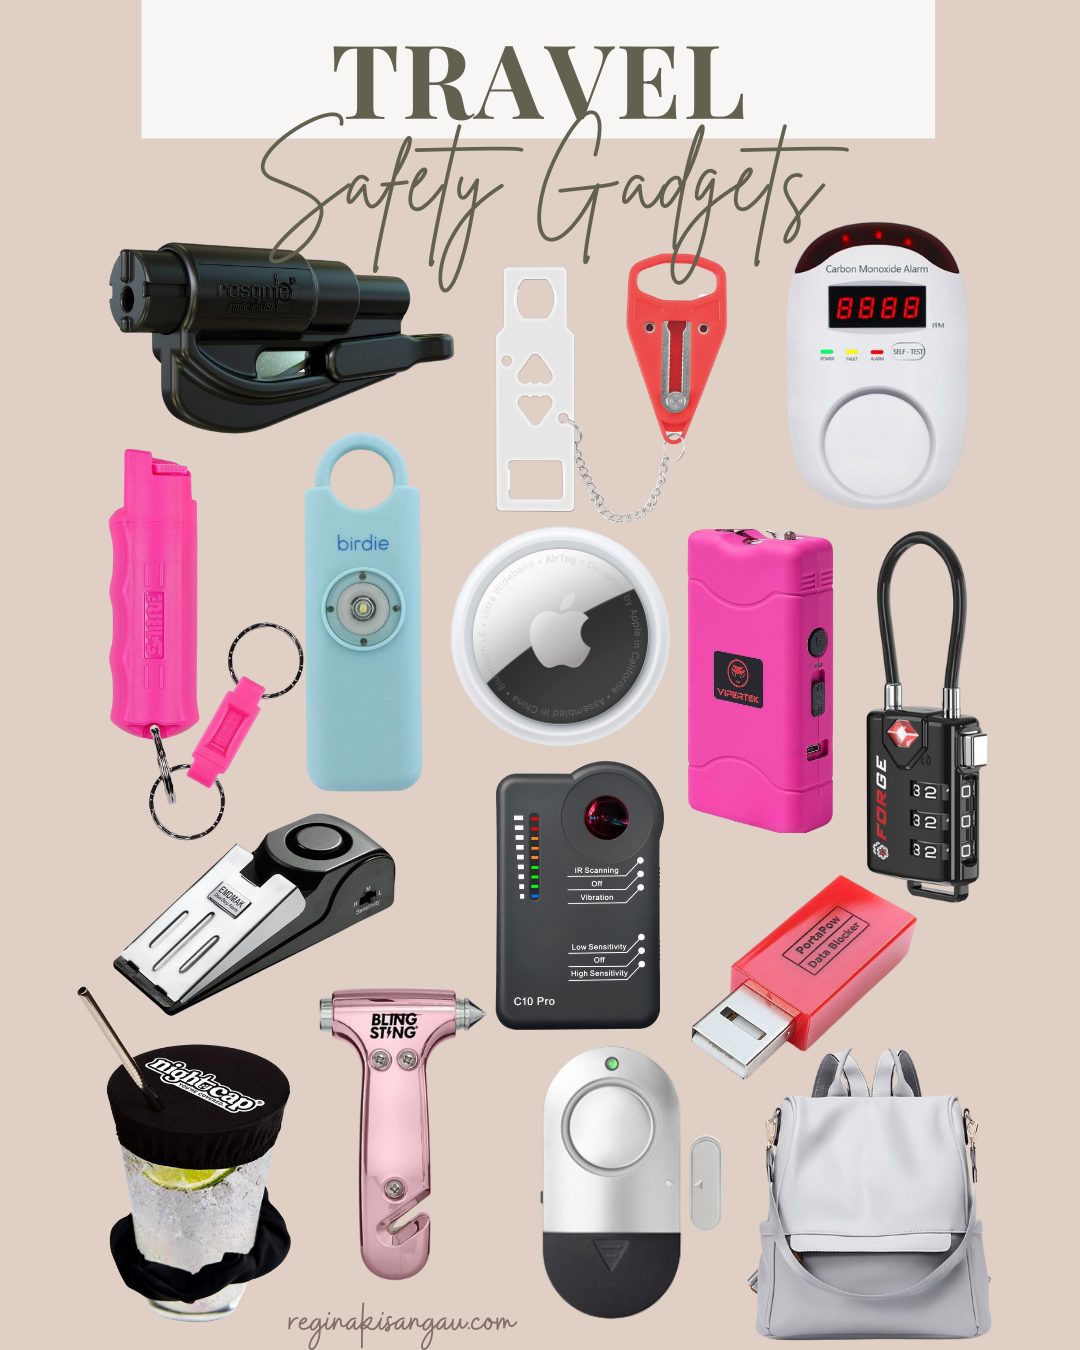 15 Travel Safety Gadgets Every Girl Needs on Their Trip